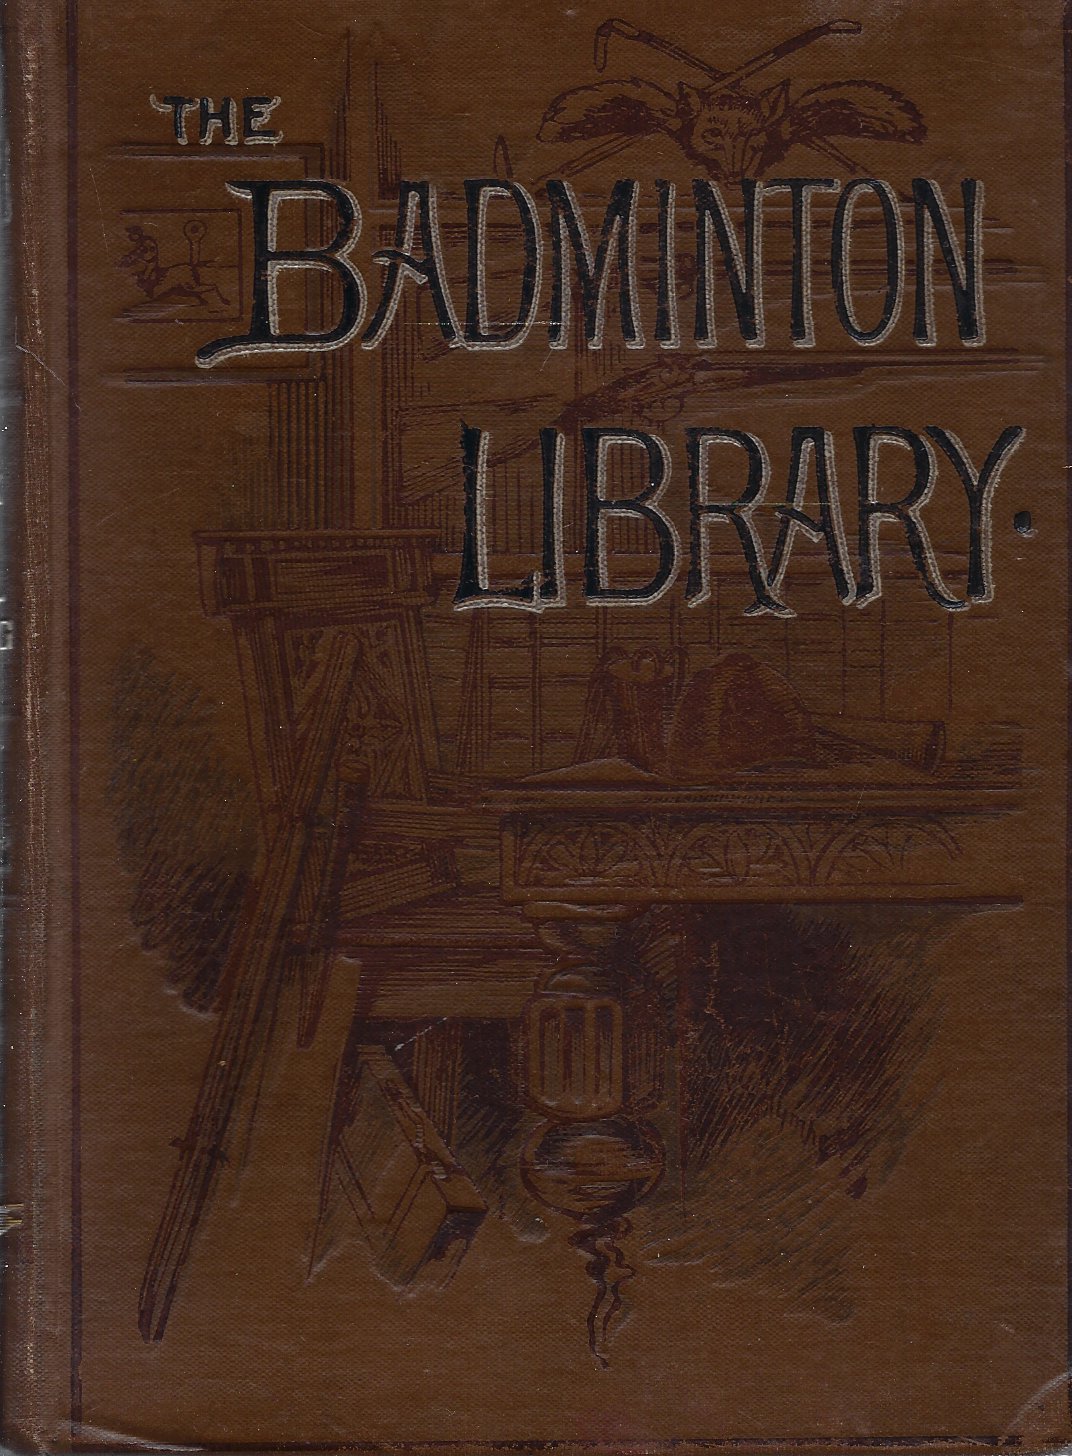 Steel, A.G. and Lyttelton, R. H. - The Badminton Library - Cricket